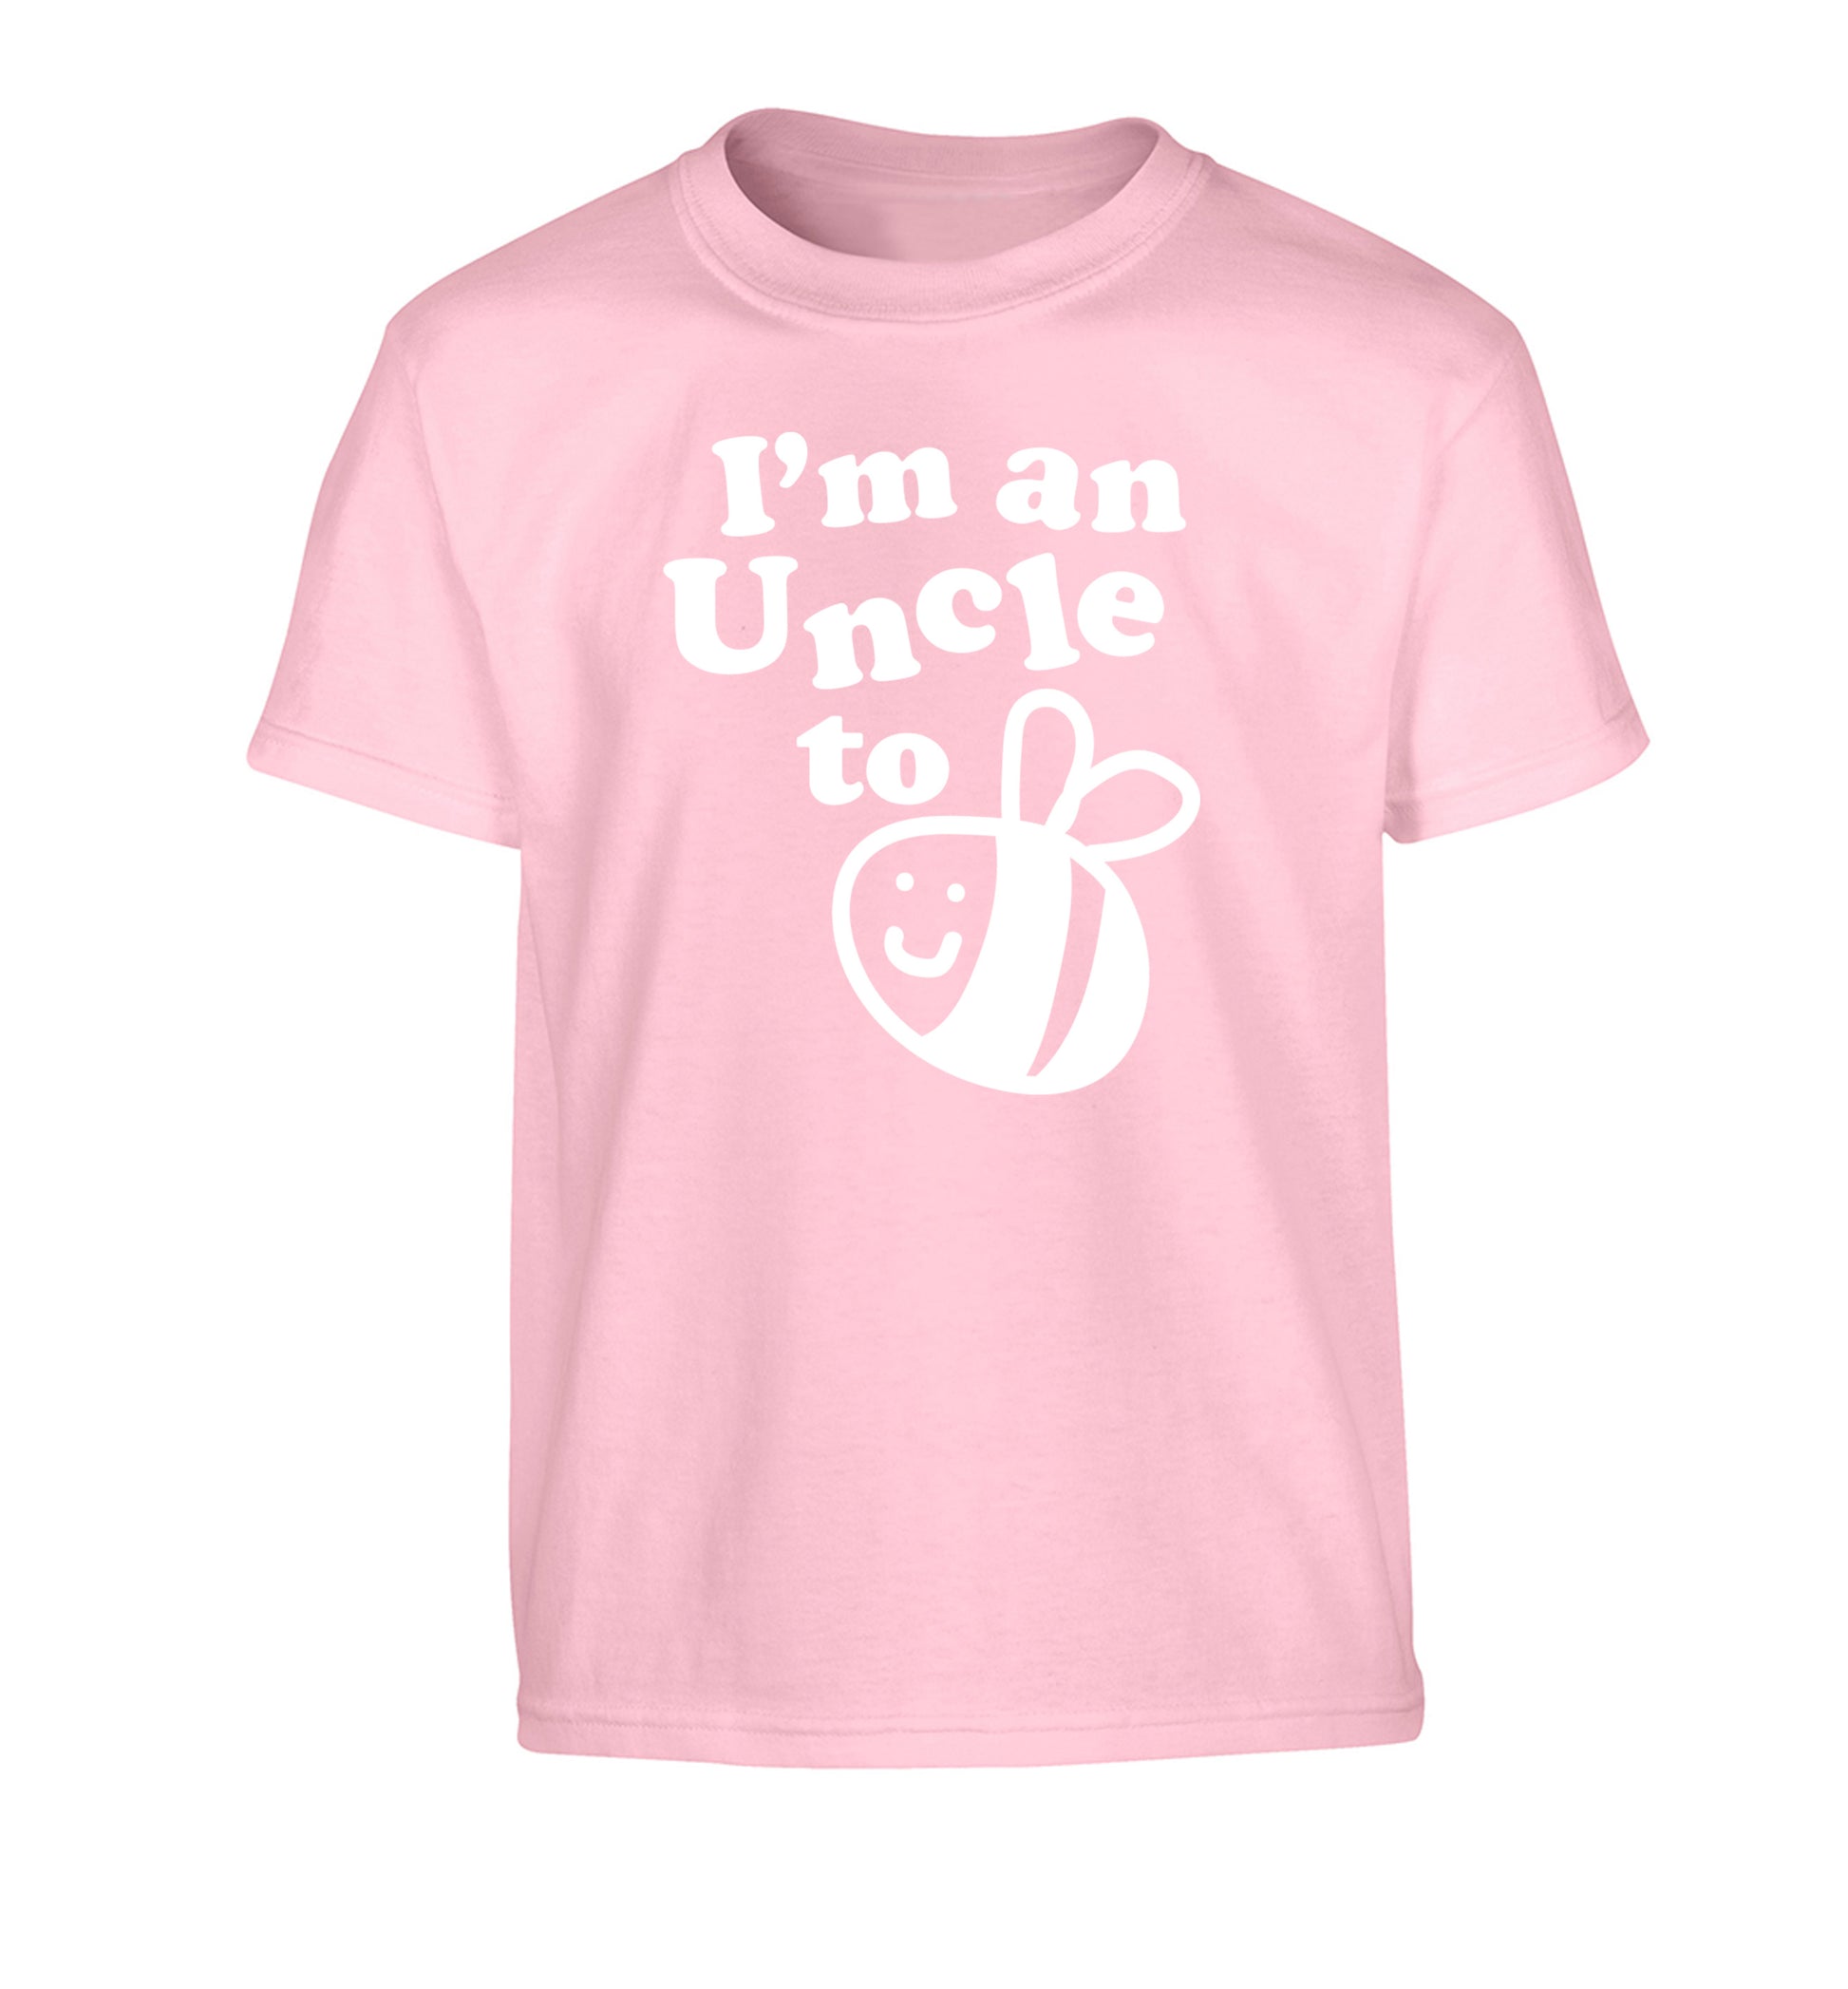 I'm an uncle to be Children's light pink Tshirt 12-14 Years